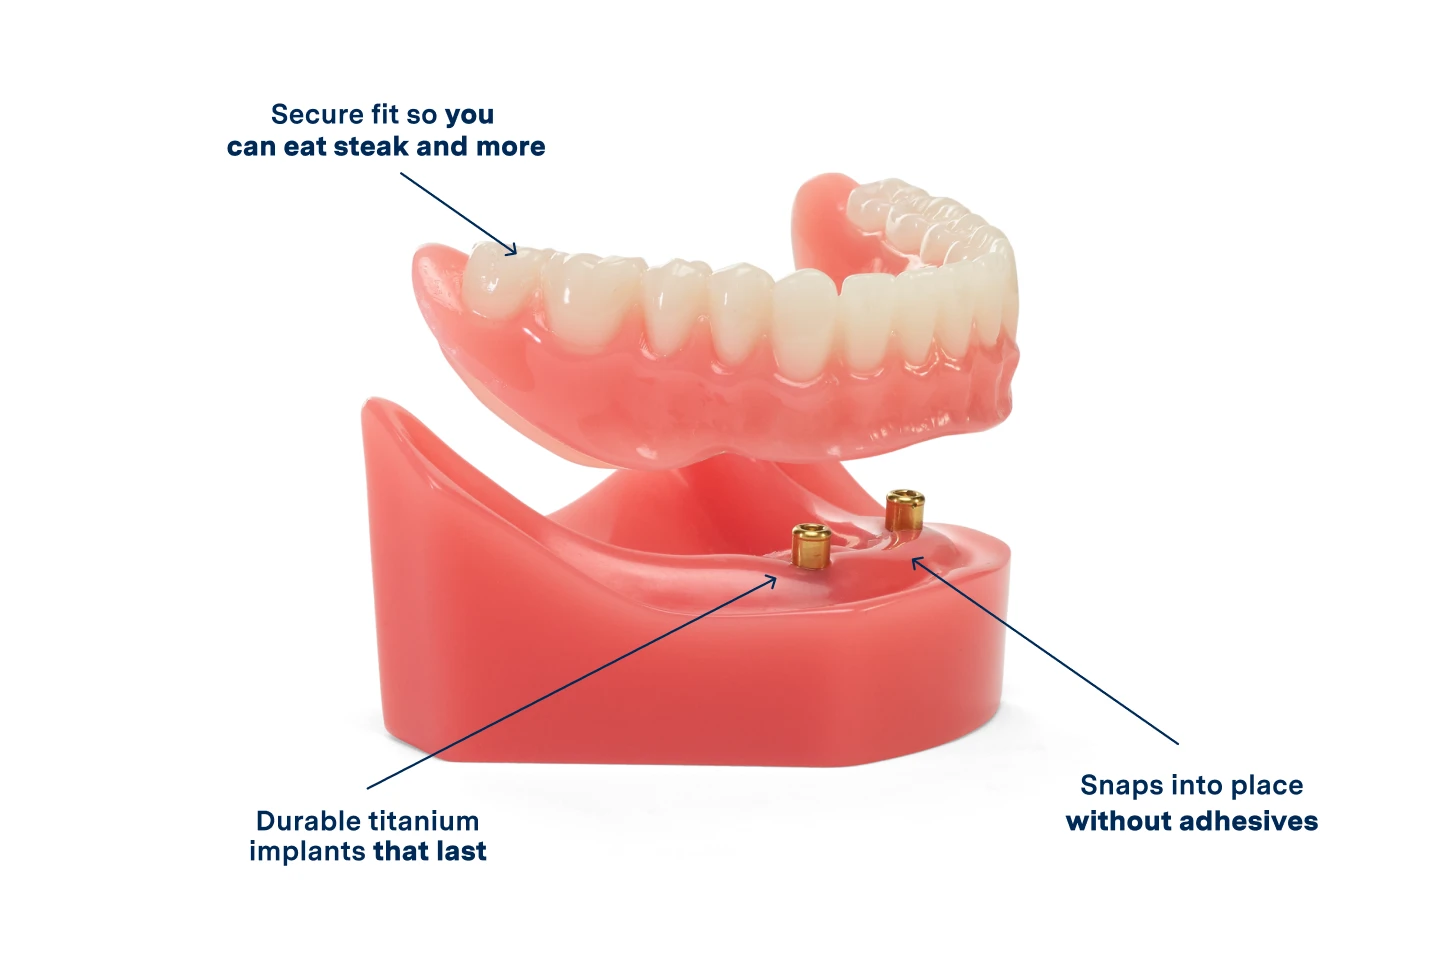 A model of implant dentures showcasing the features:
3x stronger bite than conventional dentures
snaps into place without adhesives, and
A lasting titanium implant for a comfortable fit